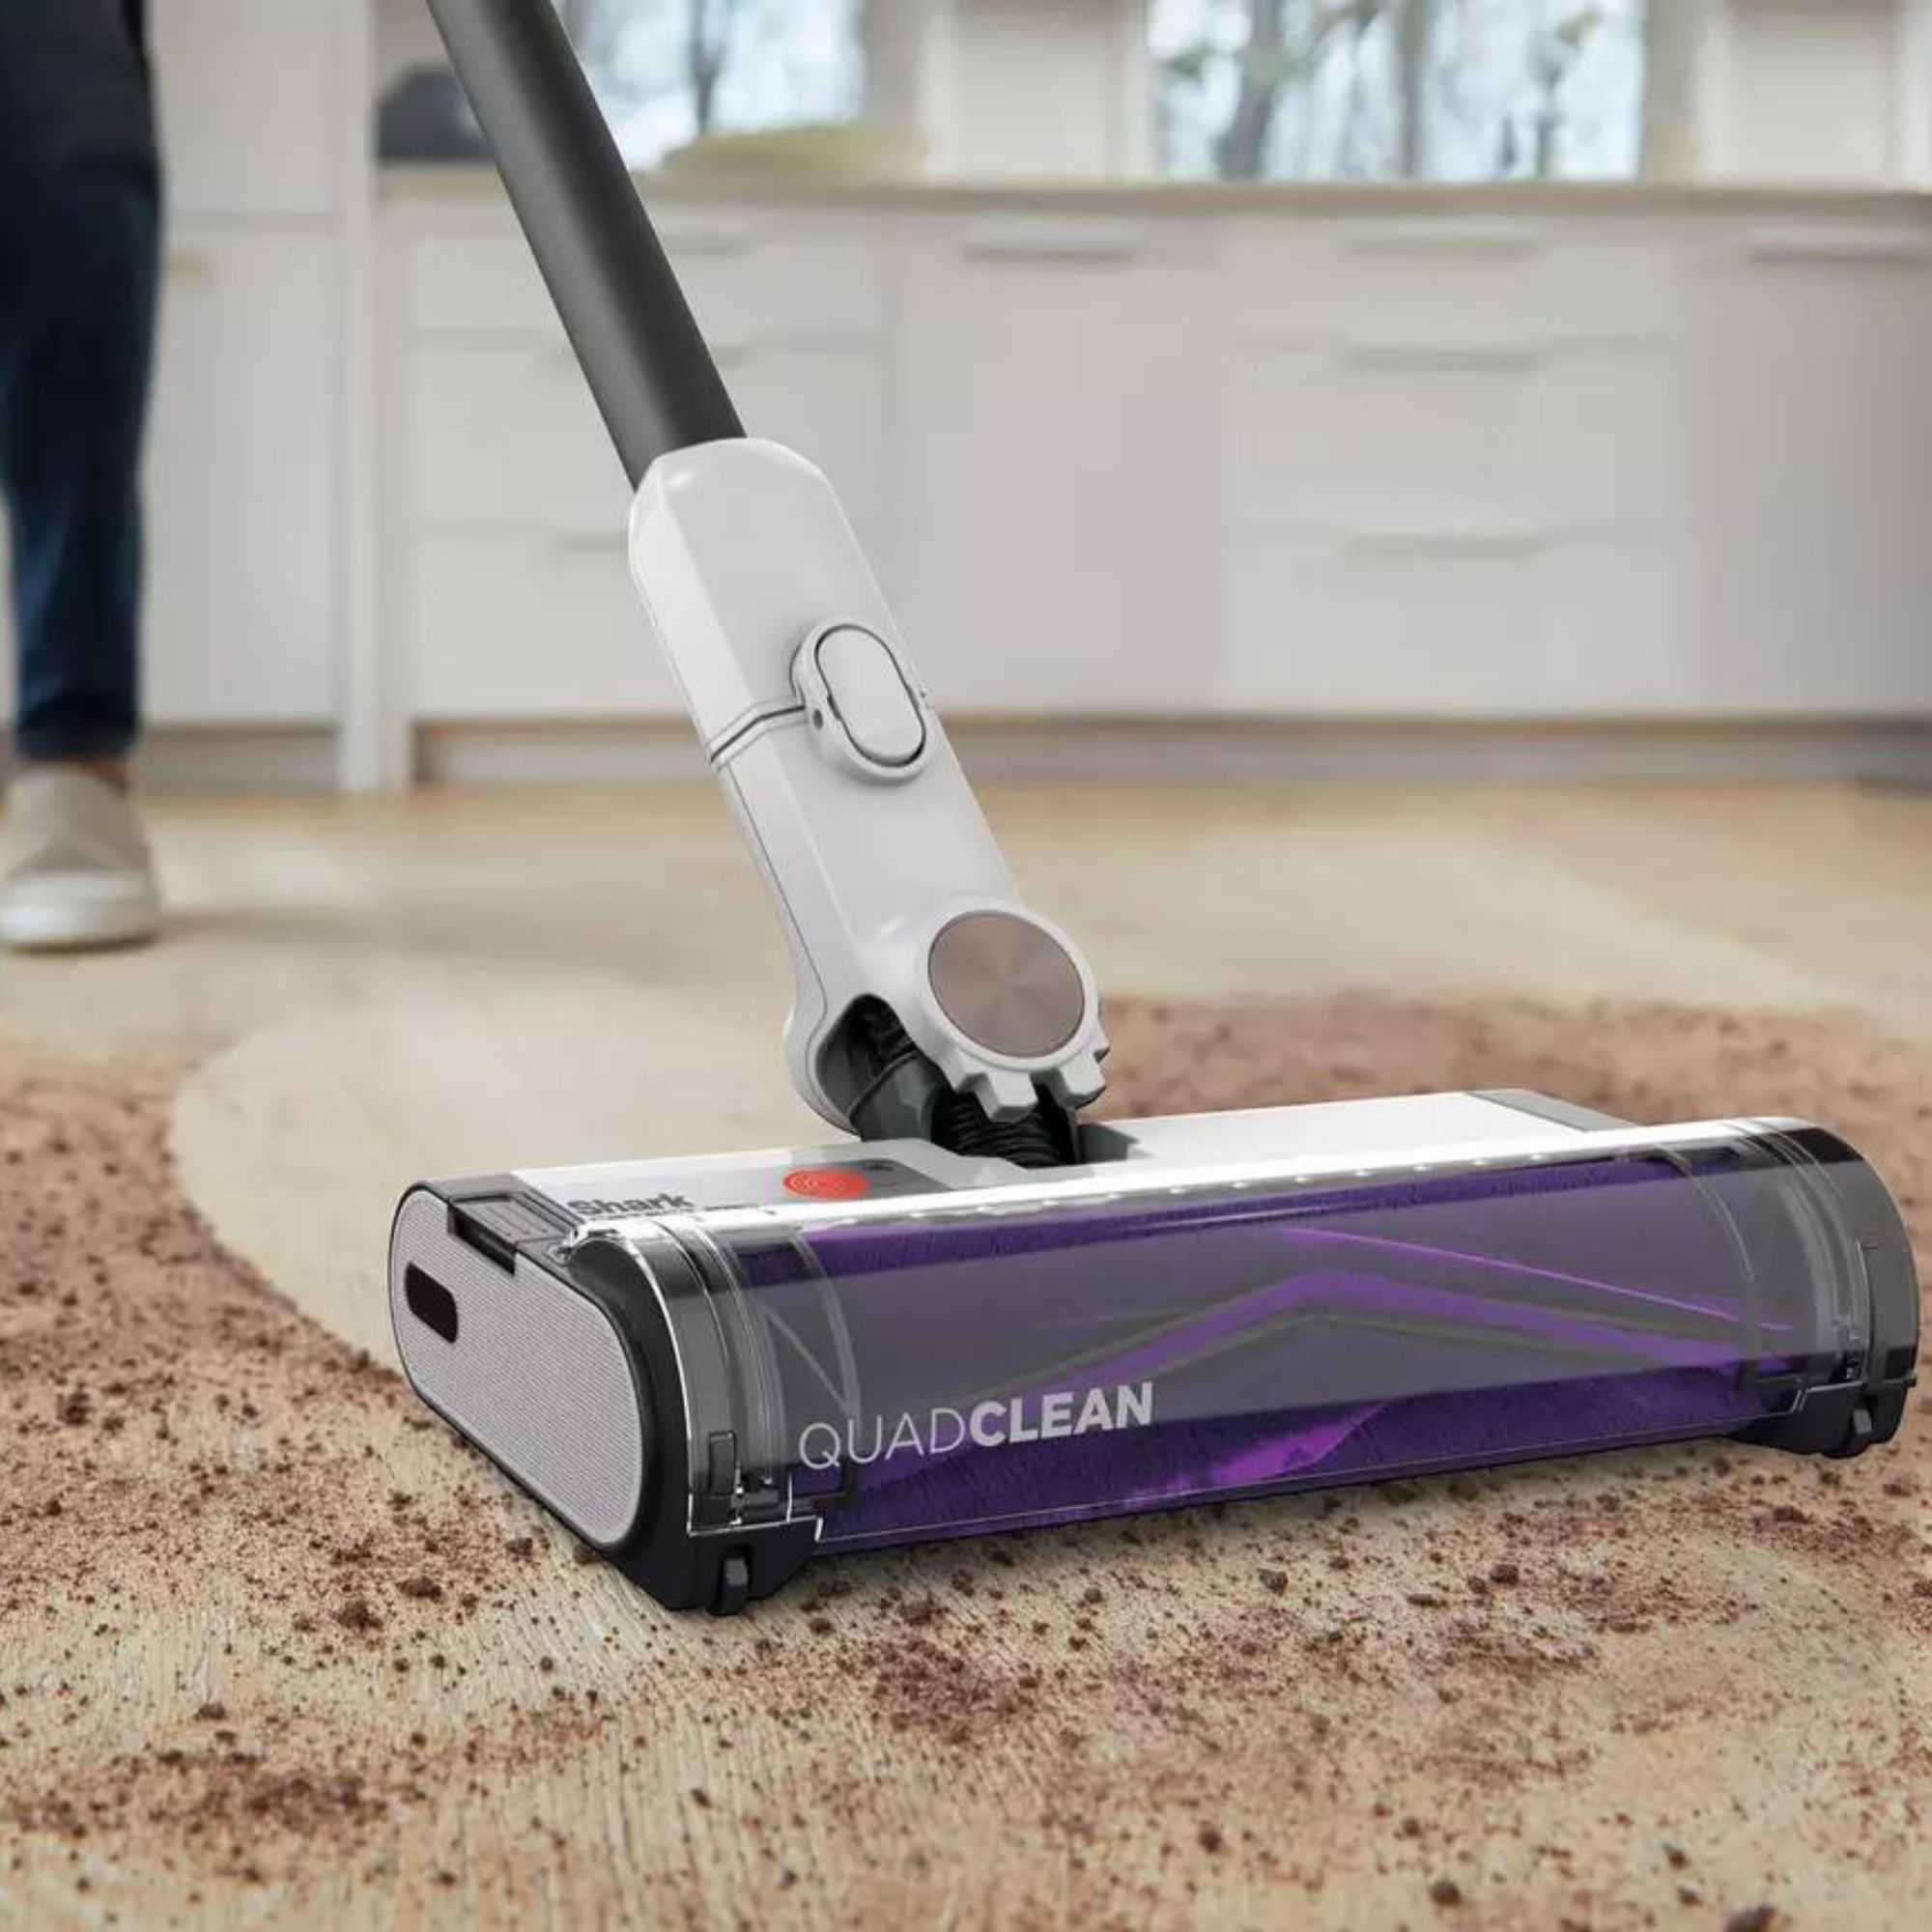 Shark Detect Pro review: an innovative cordless vacuum…